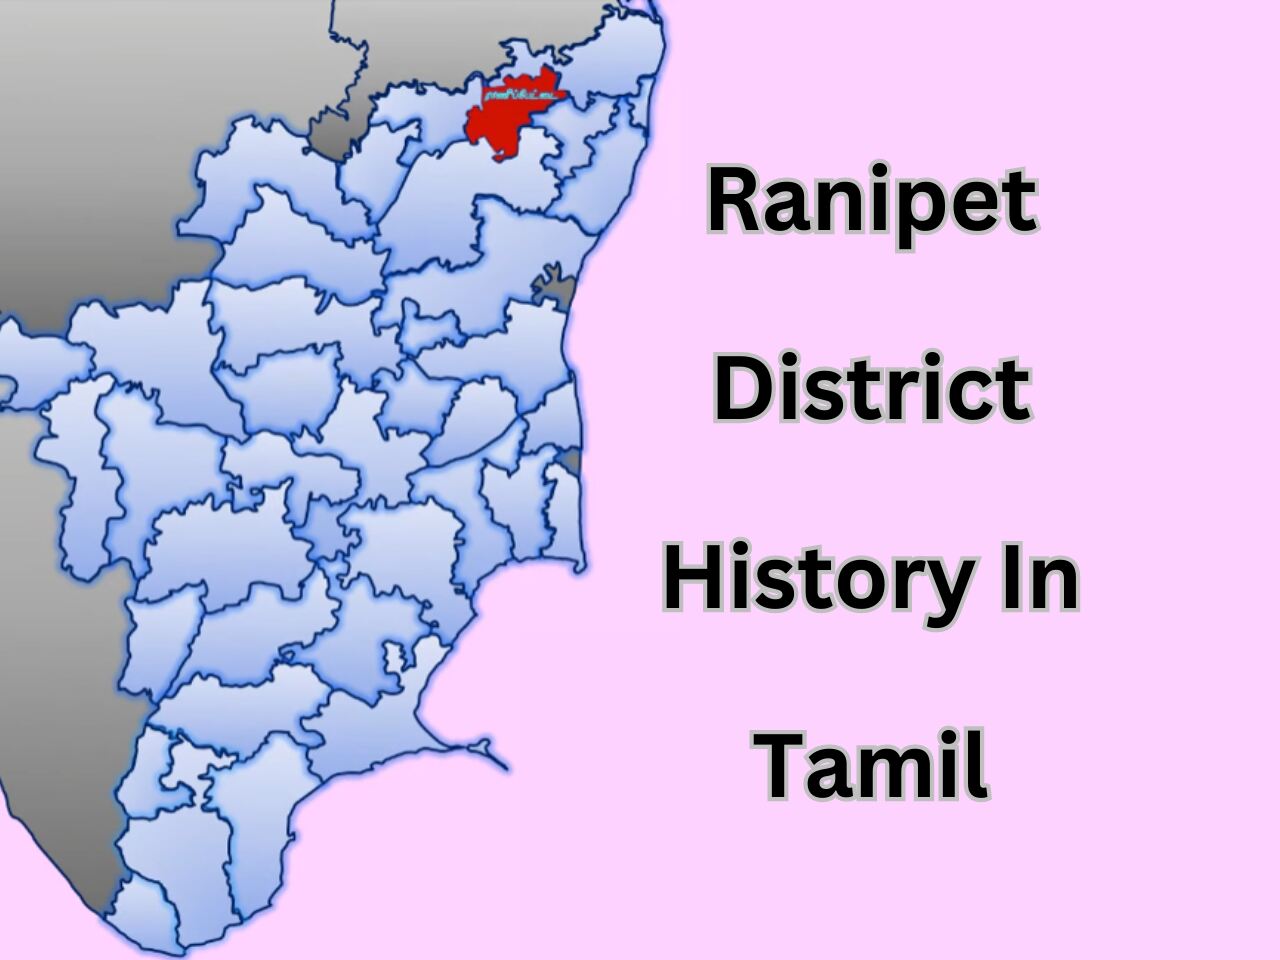 Ranipet District History In Tamil